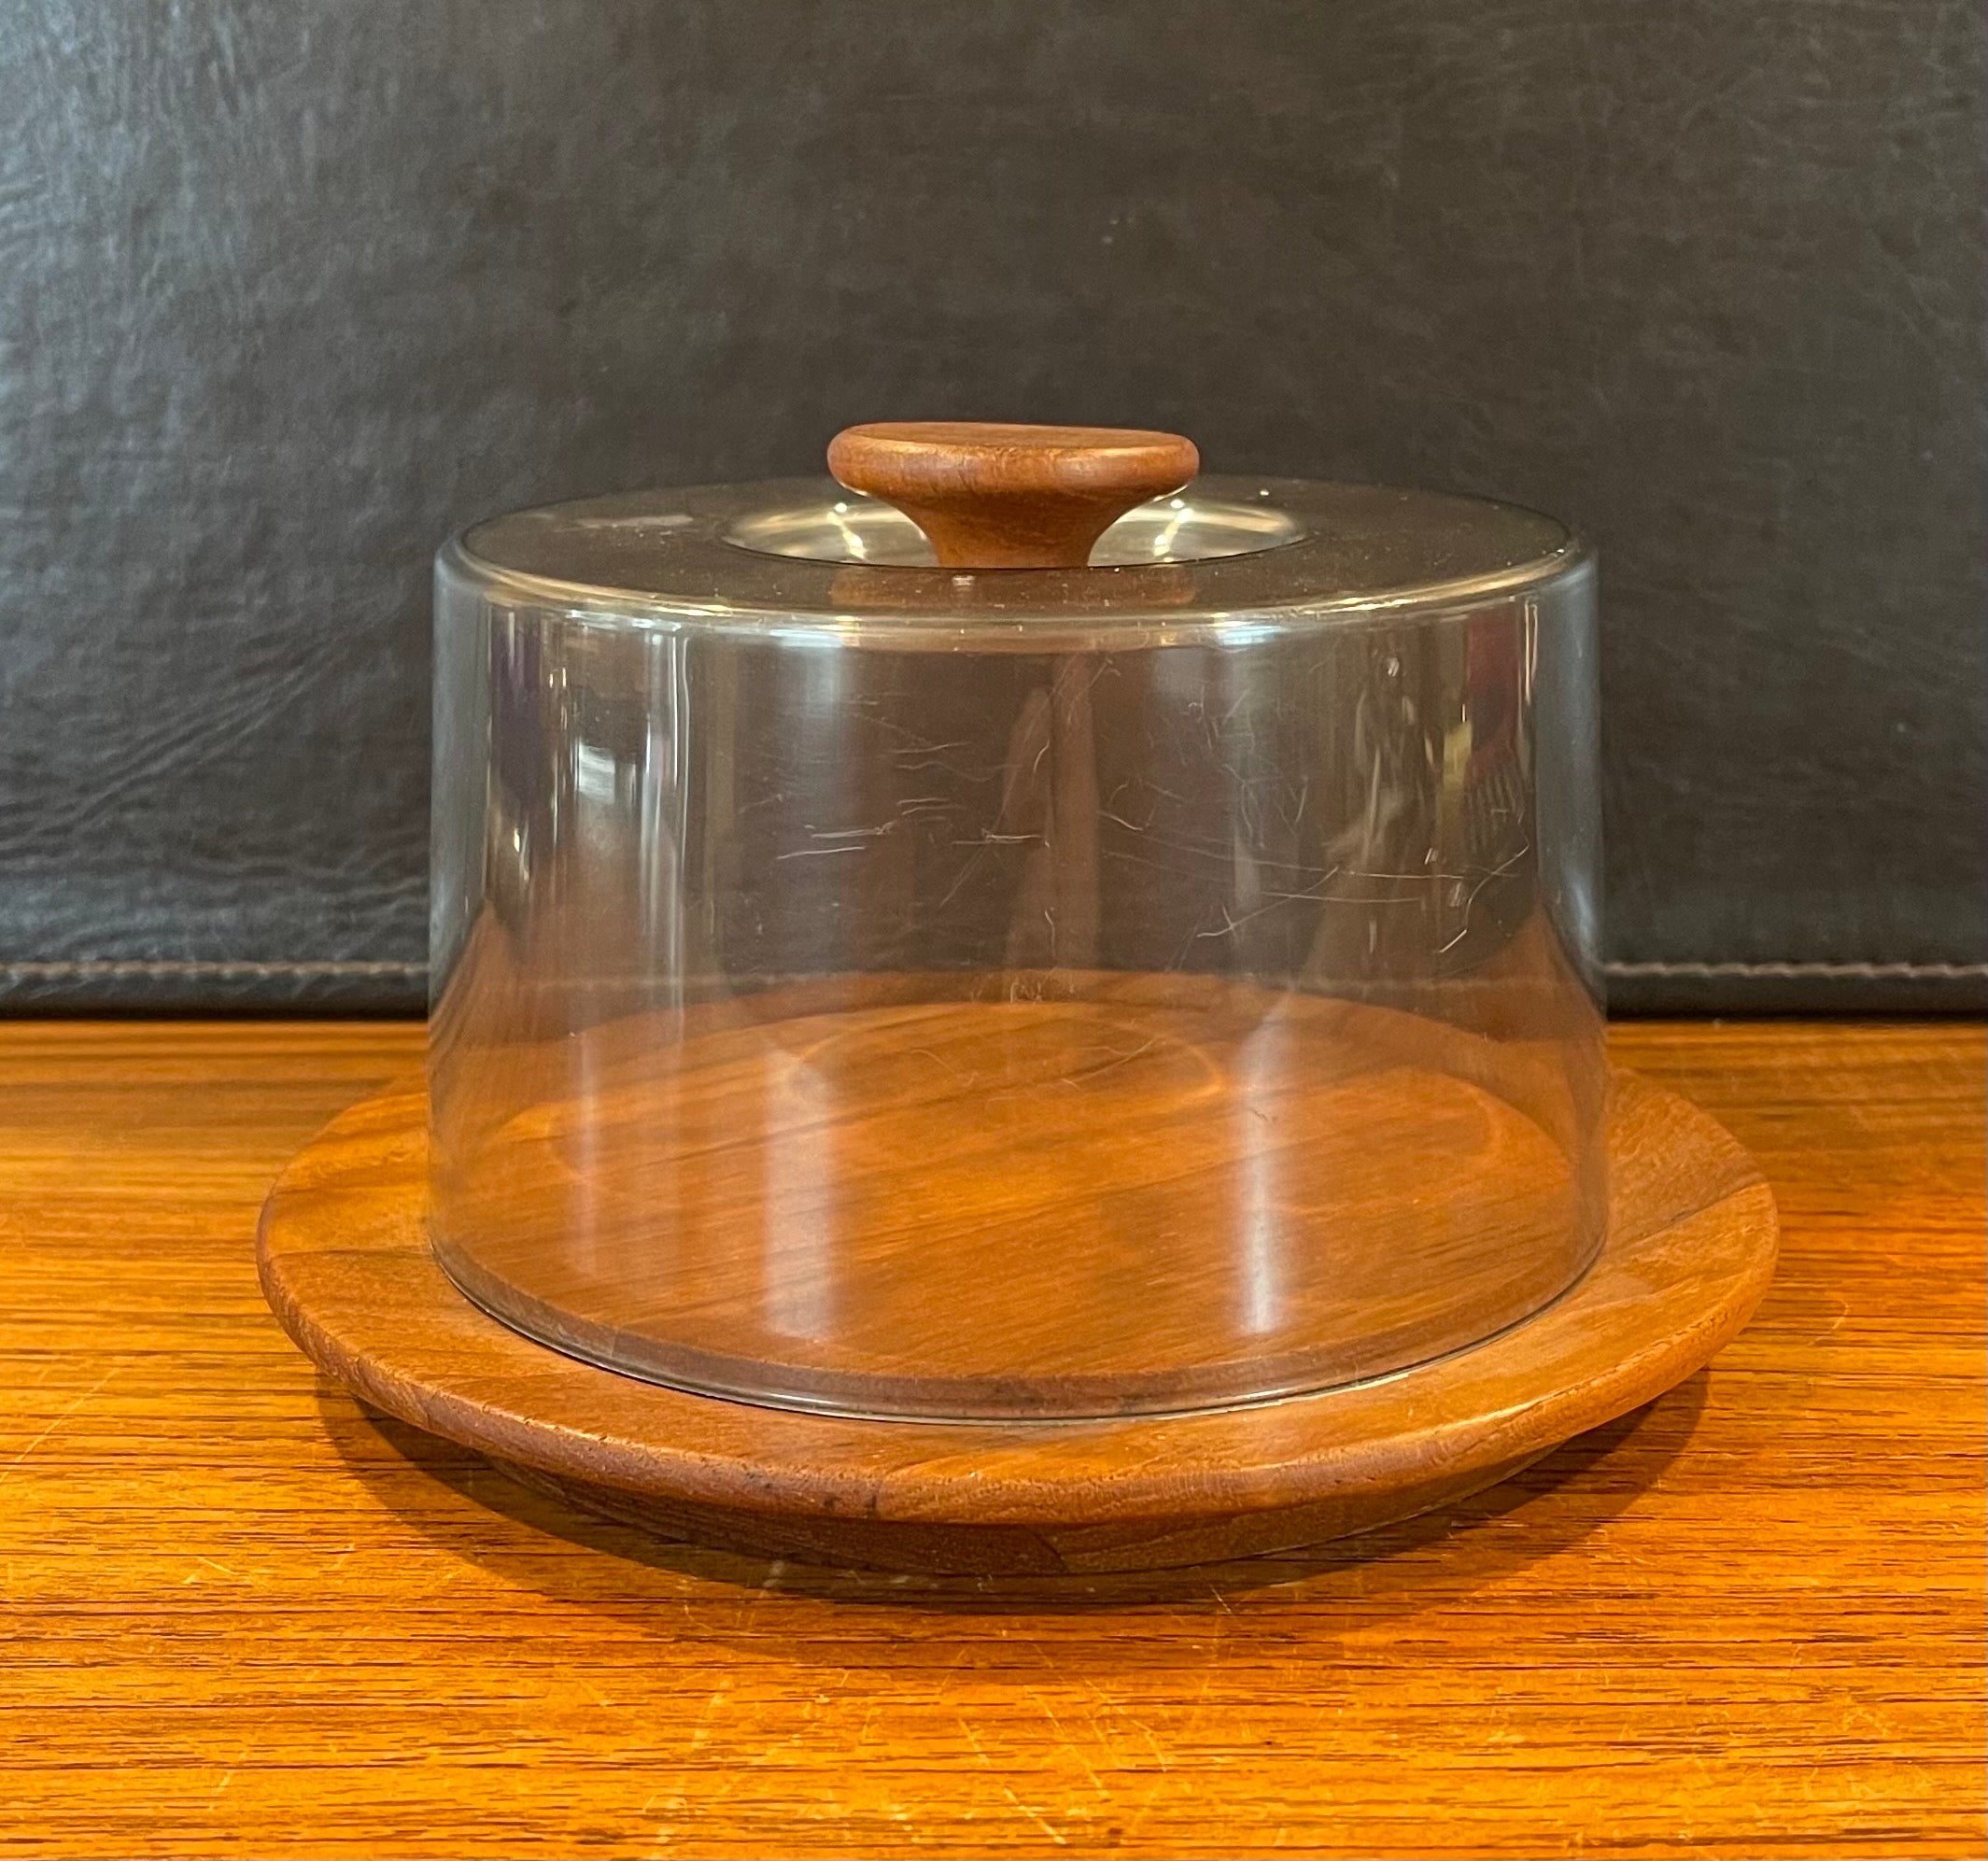 Small Danish modern cheese platter /server with plastic dome cover by Luthje Wood of Denmark, circa 1970s.  The piece is in very good vintage condition and measures 7.5